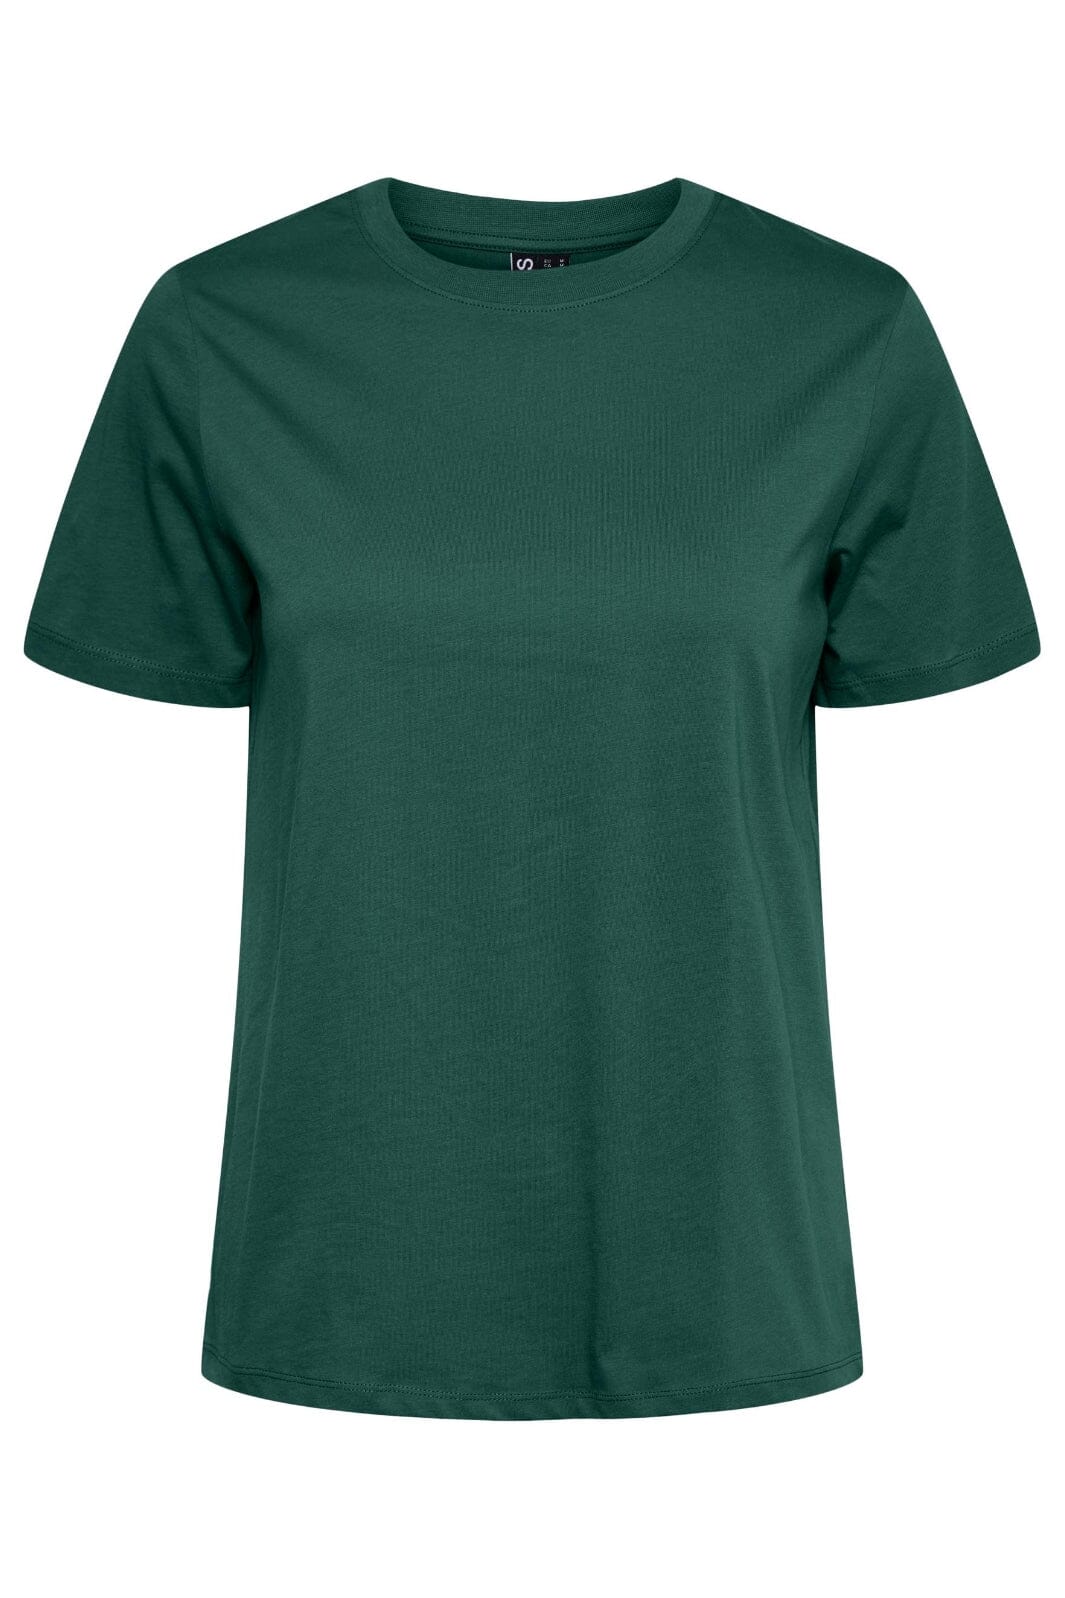 Pieces - Pcria Ss Solid Tee - 4280166 Trekking Green T-shirts 